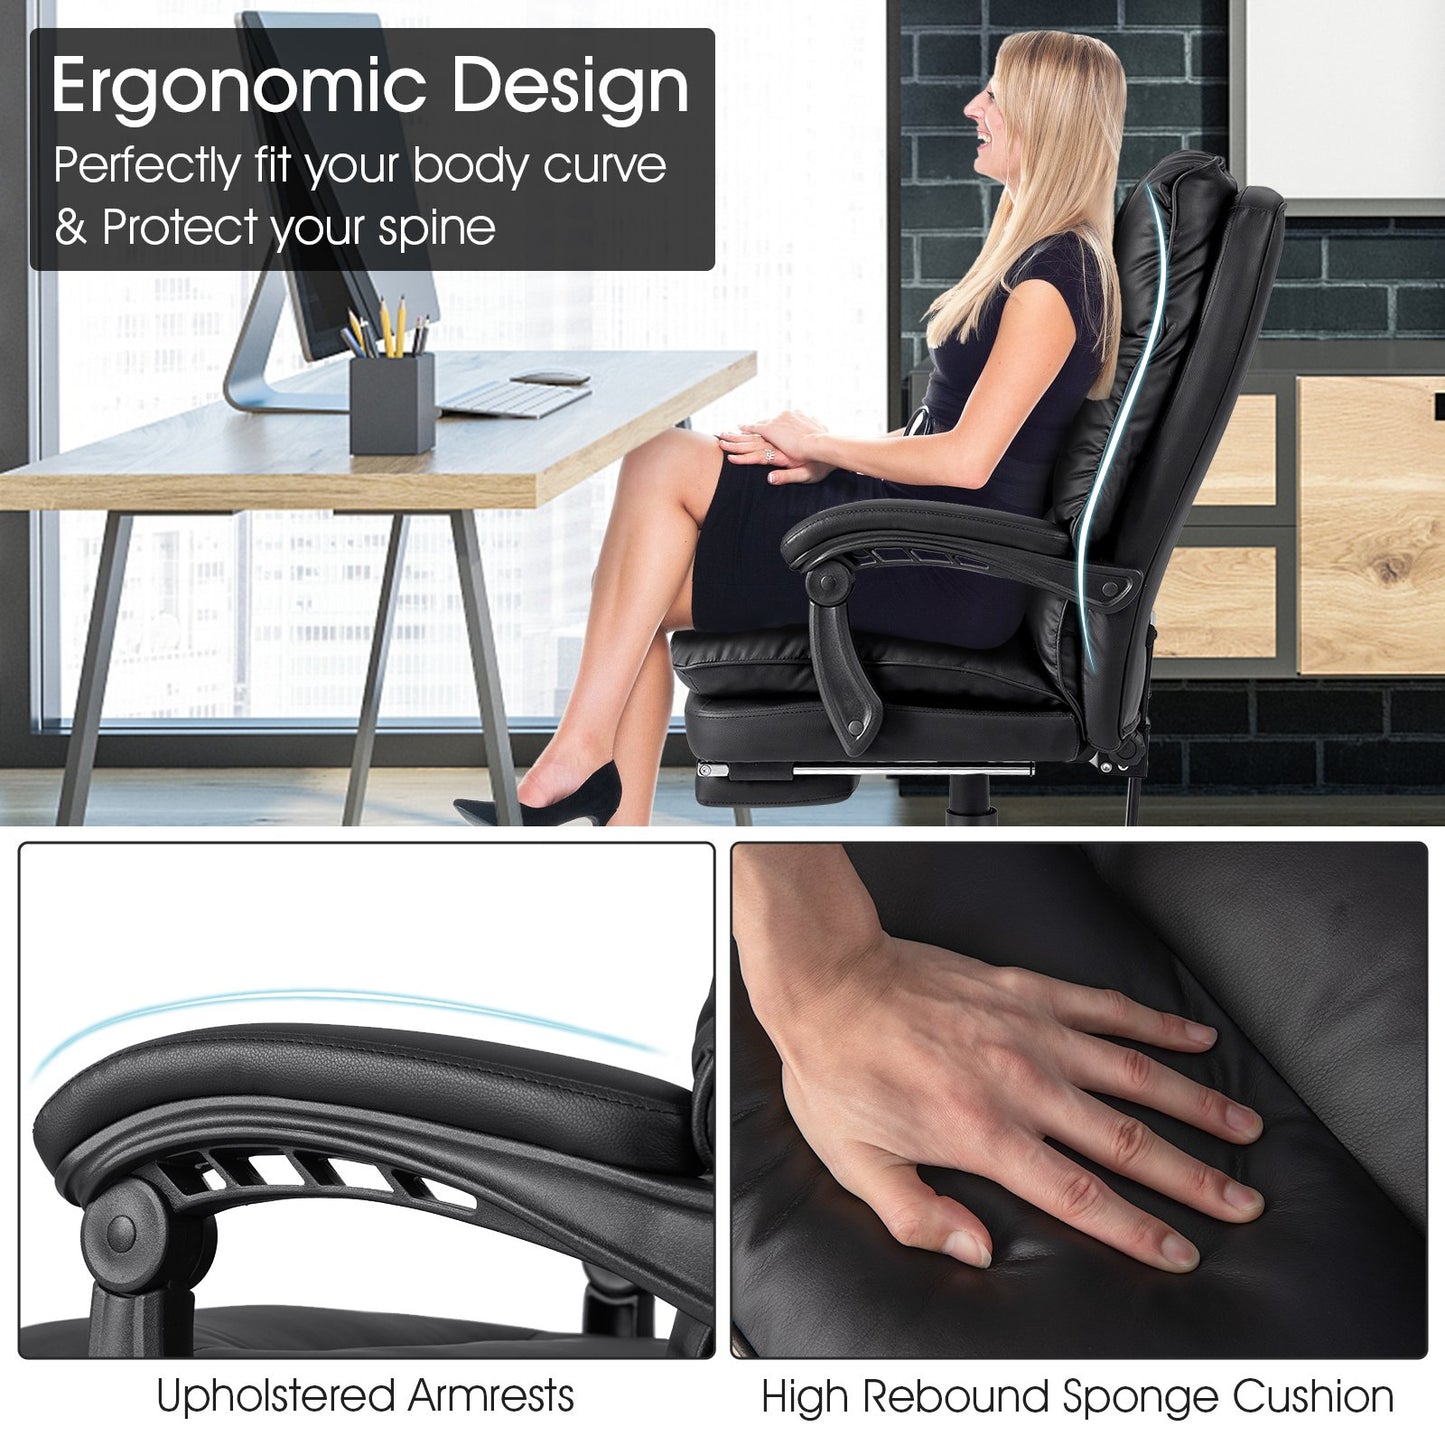 Ergonomic Adjustable Swivel Office Chair with Retractable Footrest, Black - Gallery Canada